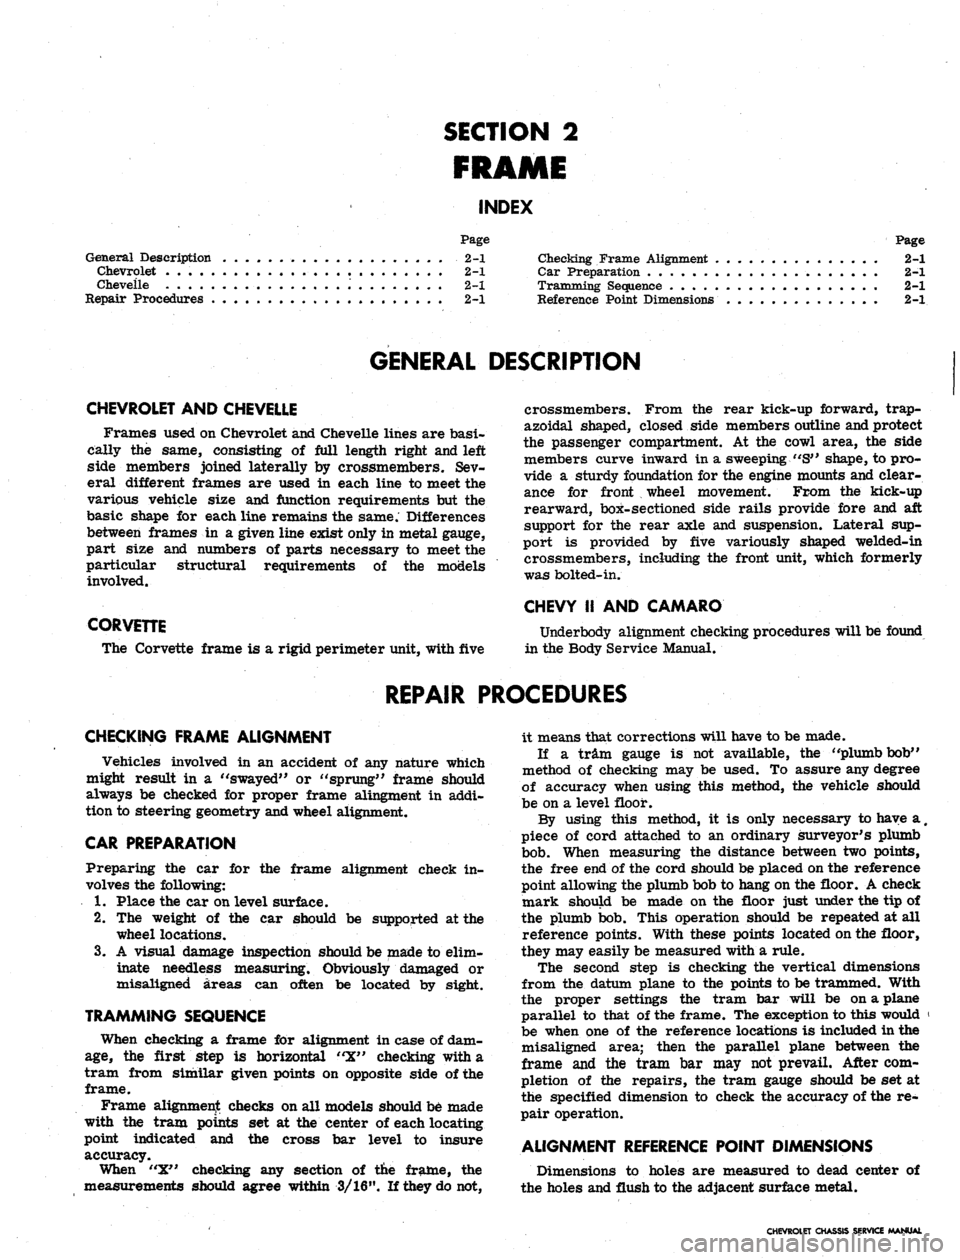 CHEVROLET CAMARO 1967 1.G Chassis Workshop Manual 
SECTION 2

FRAME

INDEX

Page

General Description 2-1

Chevrolet 2-1

Cheveile . 2-1

Repair Procedures 2-1 
Page

Checking Frame Alignment 2-1

Car Preparation 2-1

Tramming Sequence 2-1

Referenc